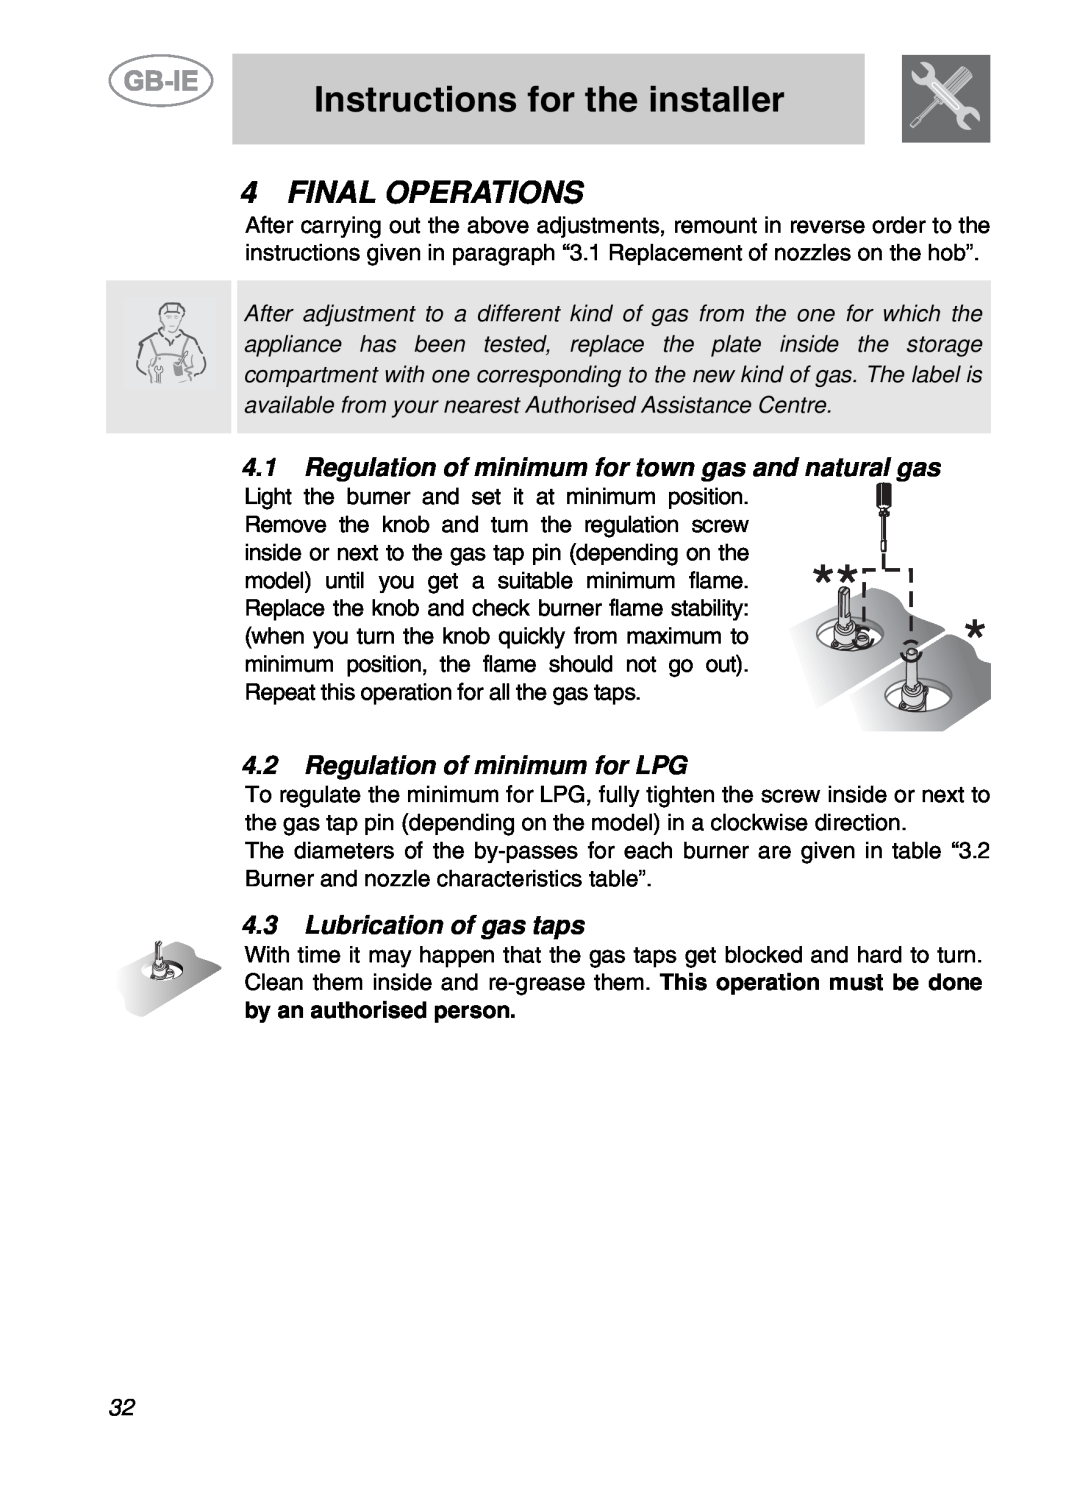 Smeg PGF95-2 manual Final Operations, Regulation of minimum for town gas and natural gas, Regulation of minimum for LPG 